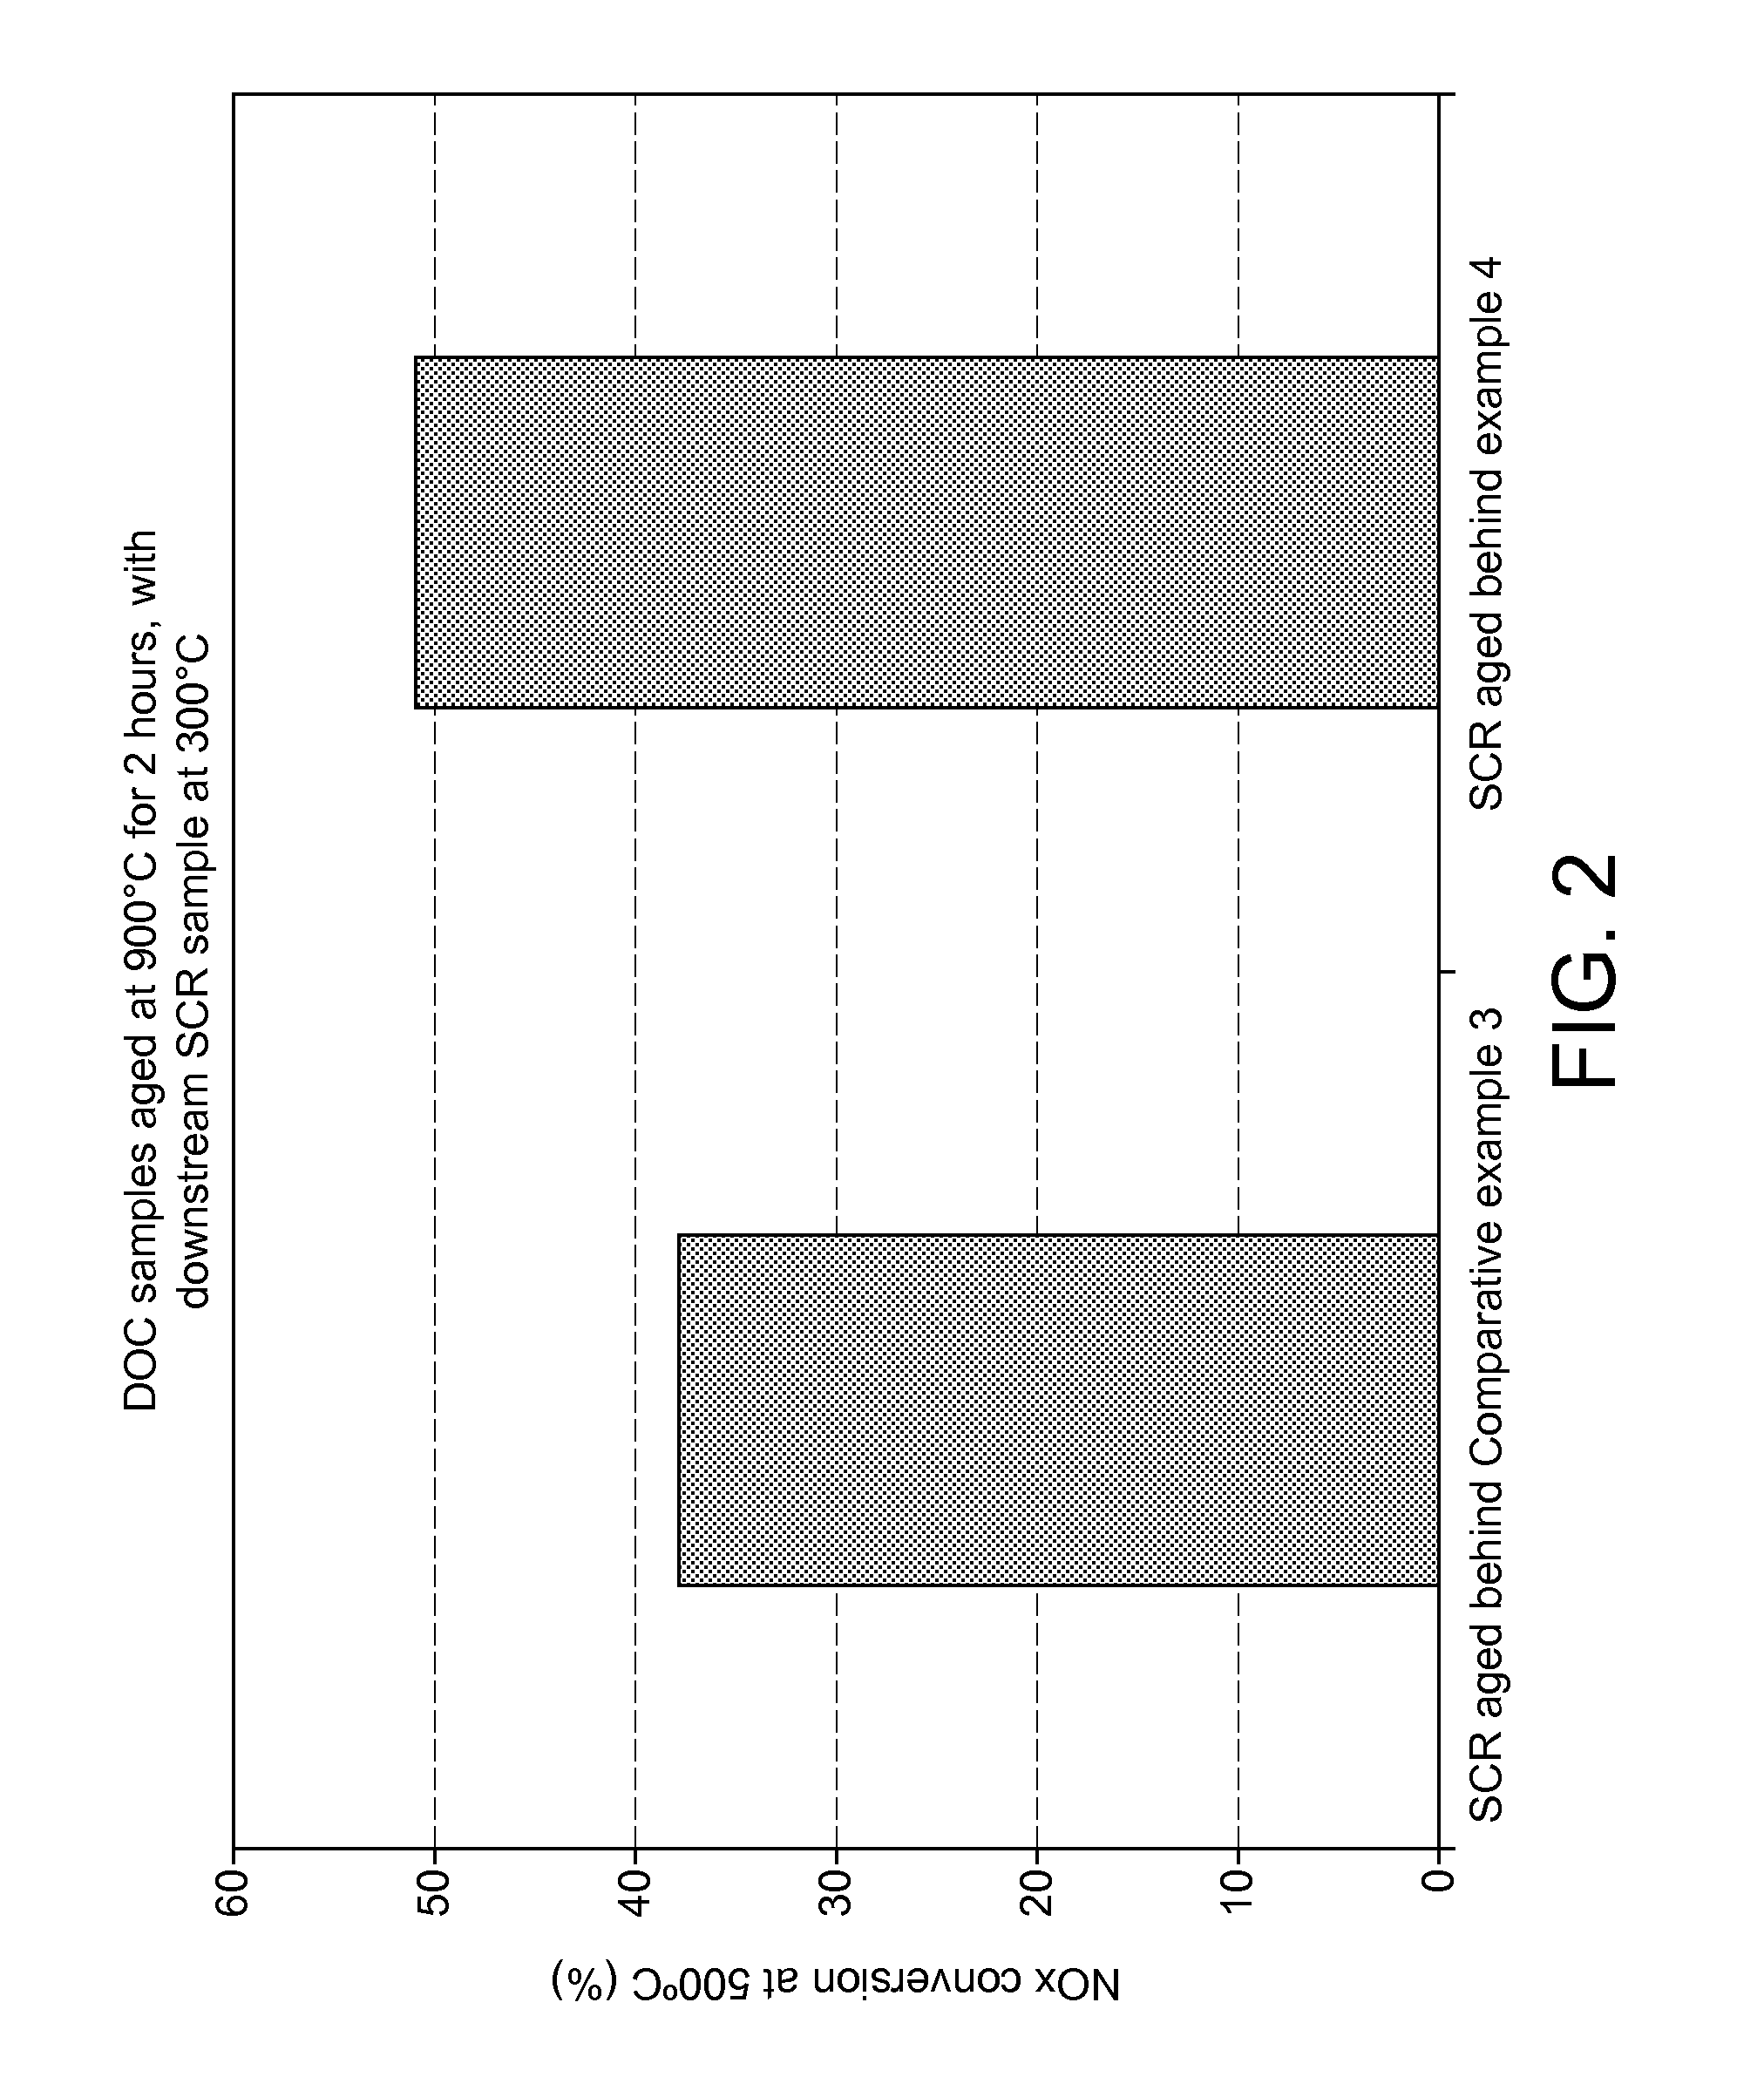 Oxidation catalyst for internal combustion engine exhaust gas treatment